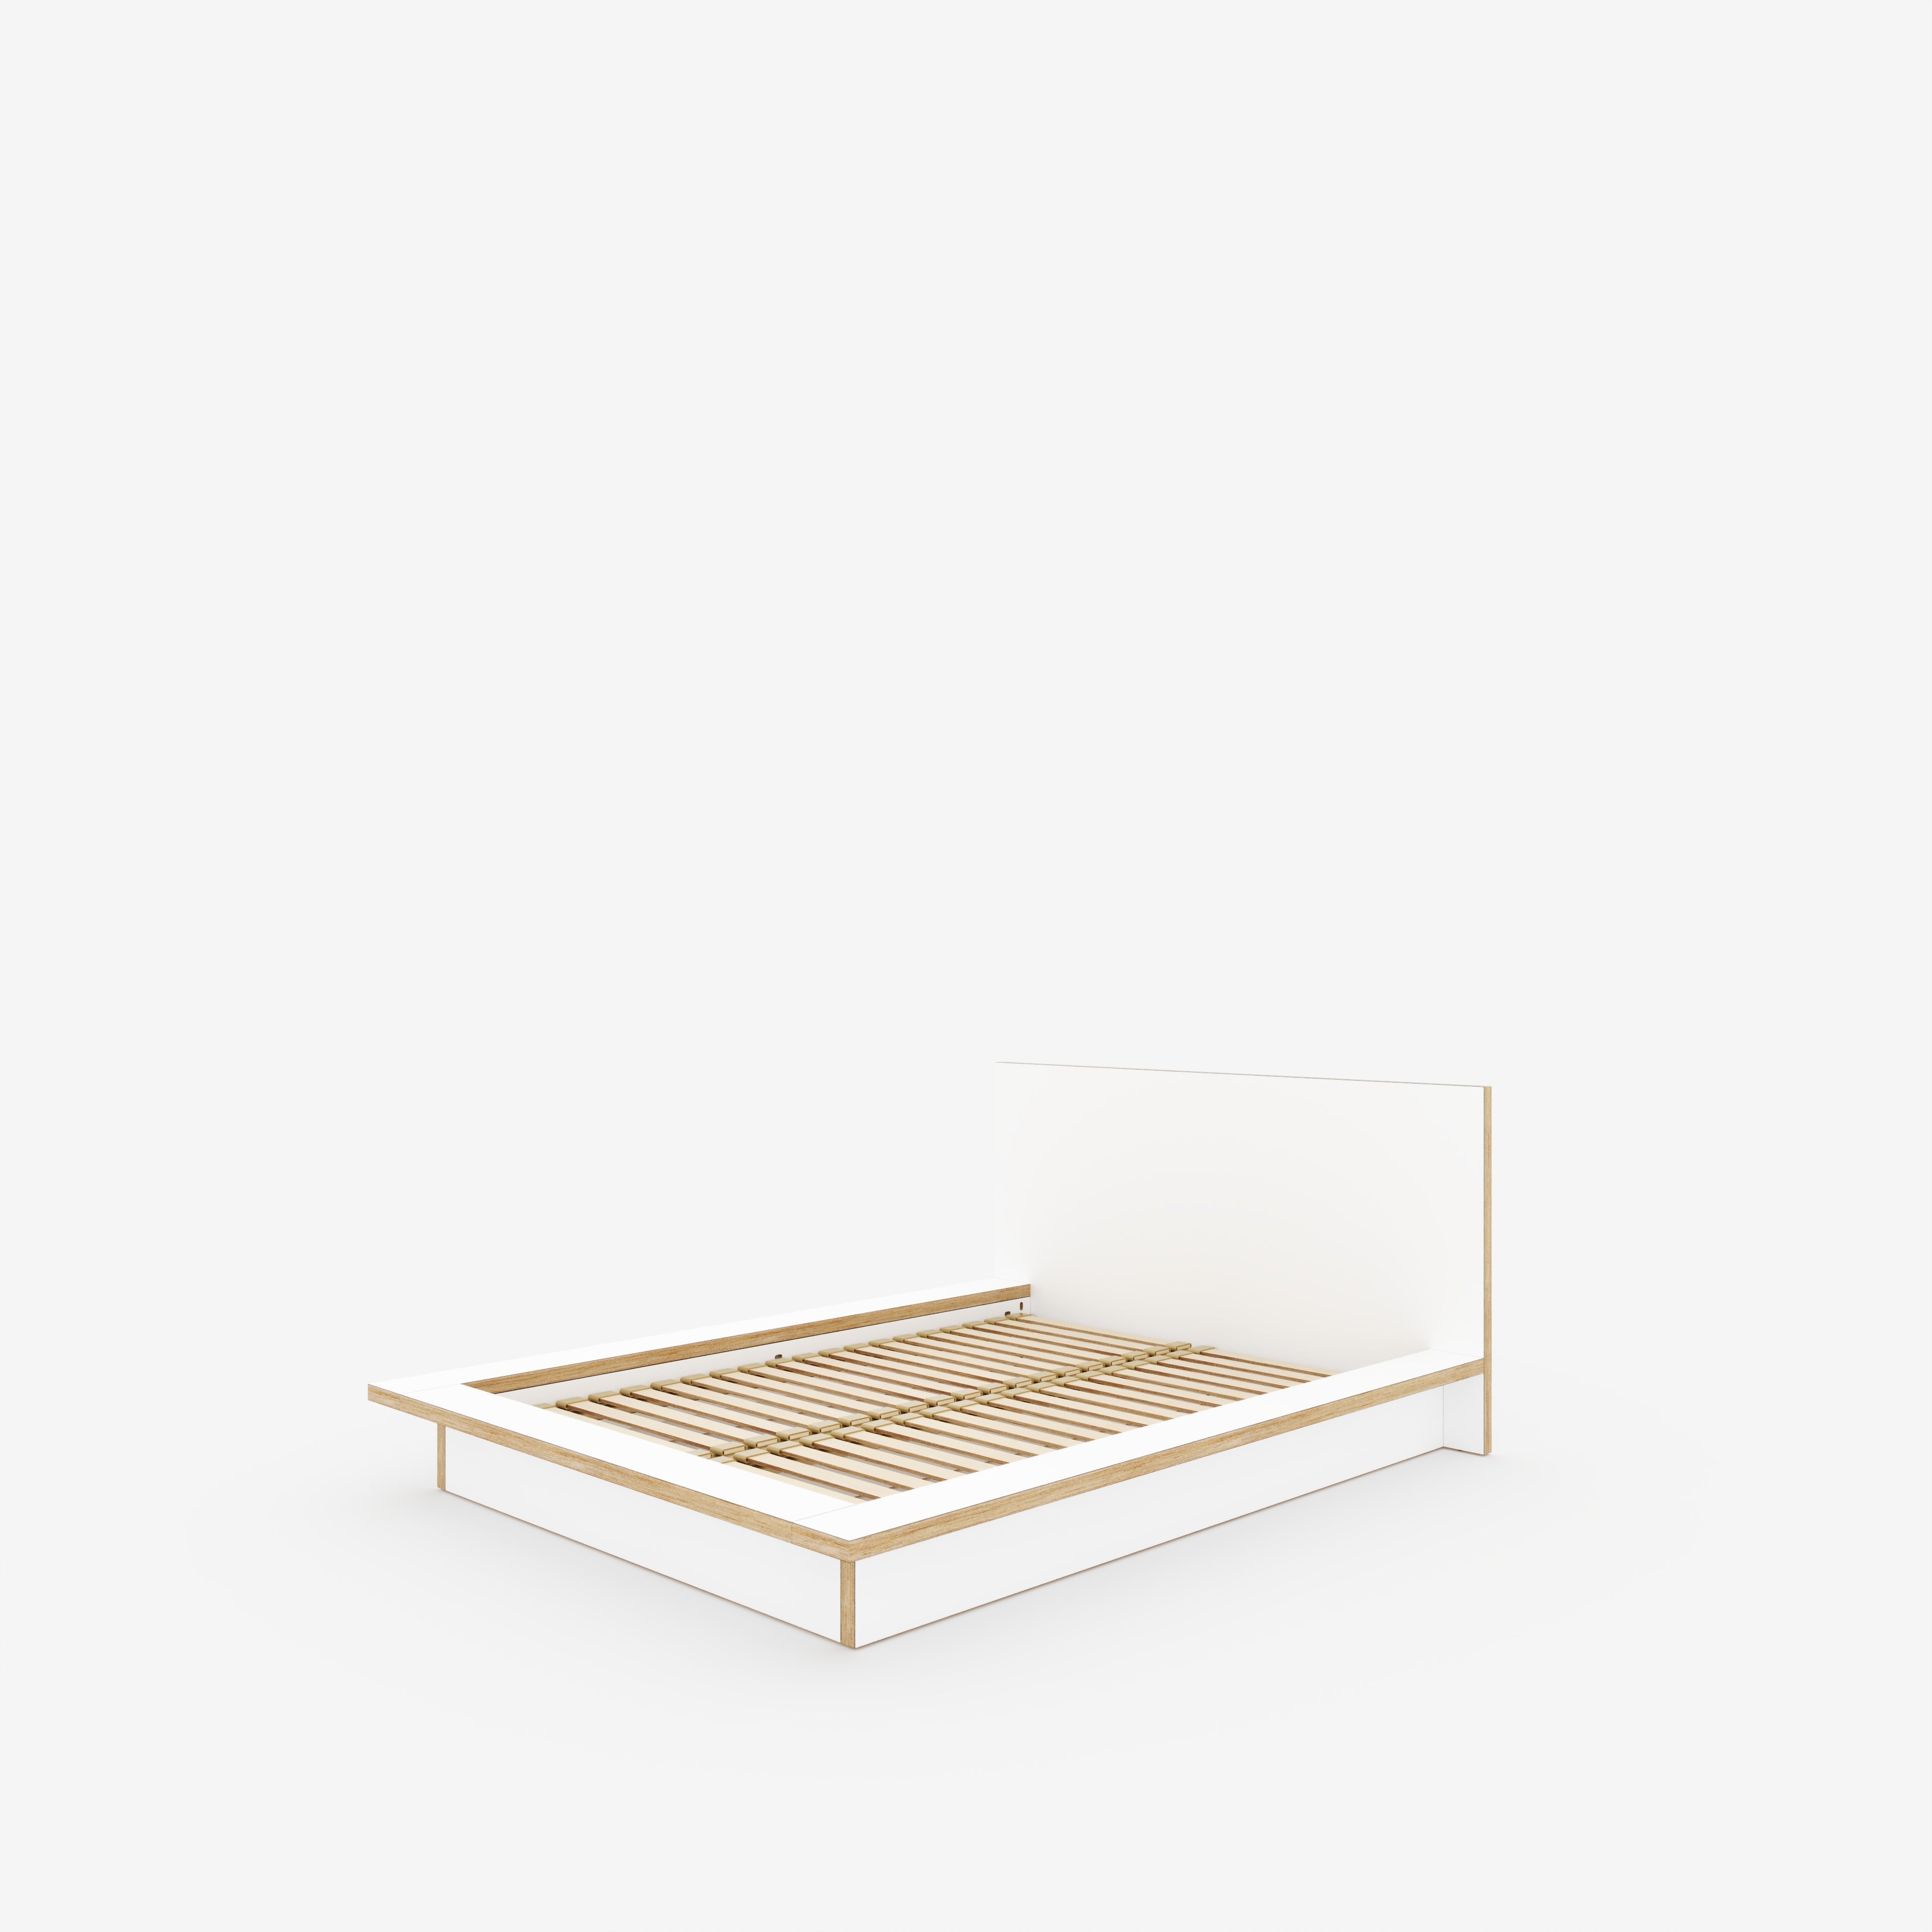 Plywood Platform Bed - Plywood Formica White - Standard Double 1350(w) x 1900(d) Low